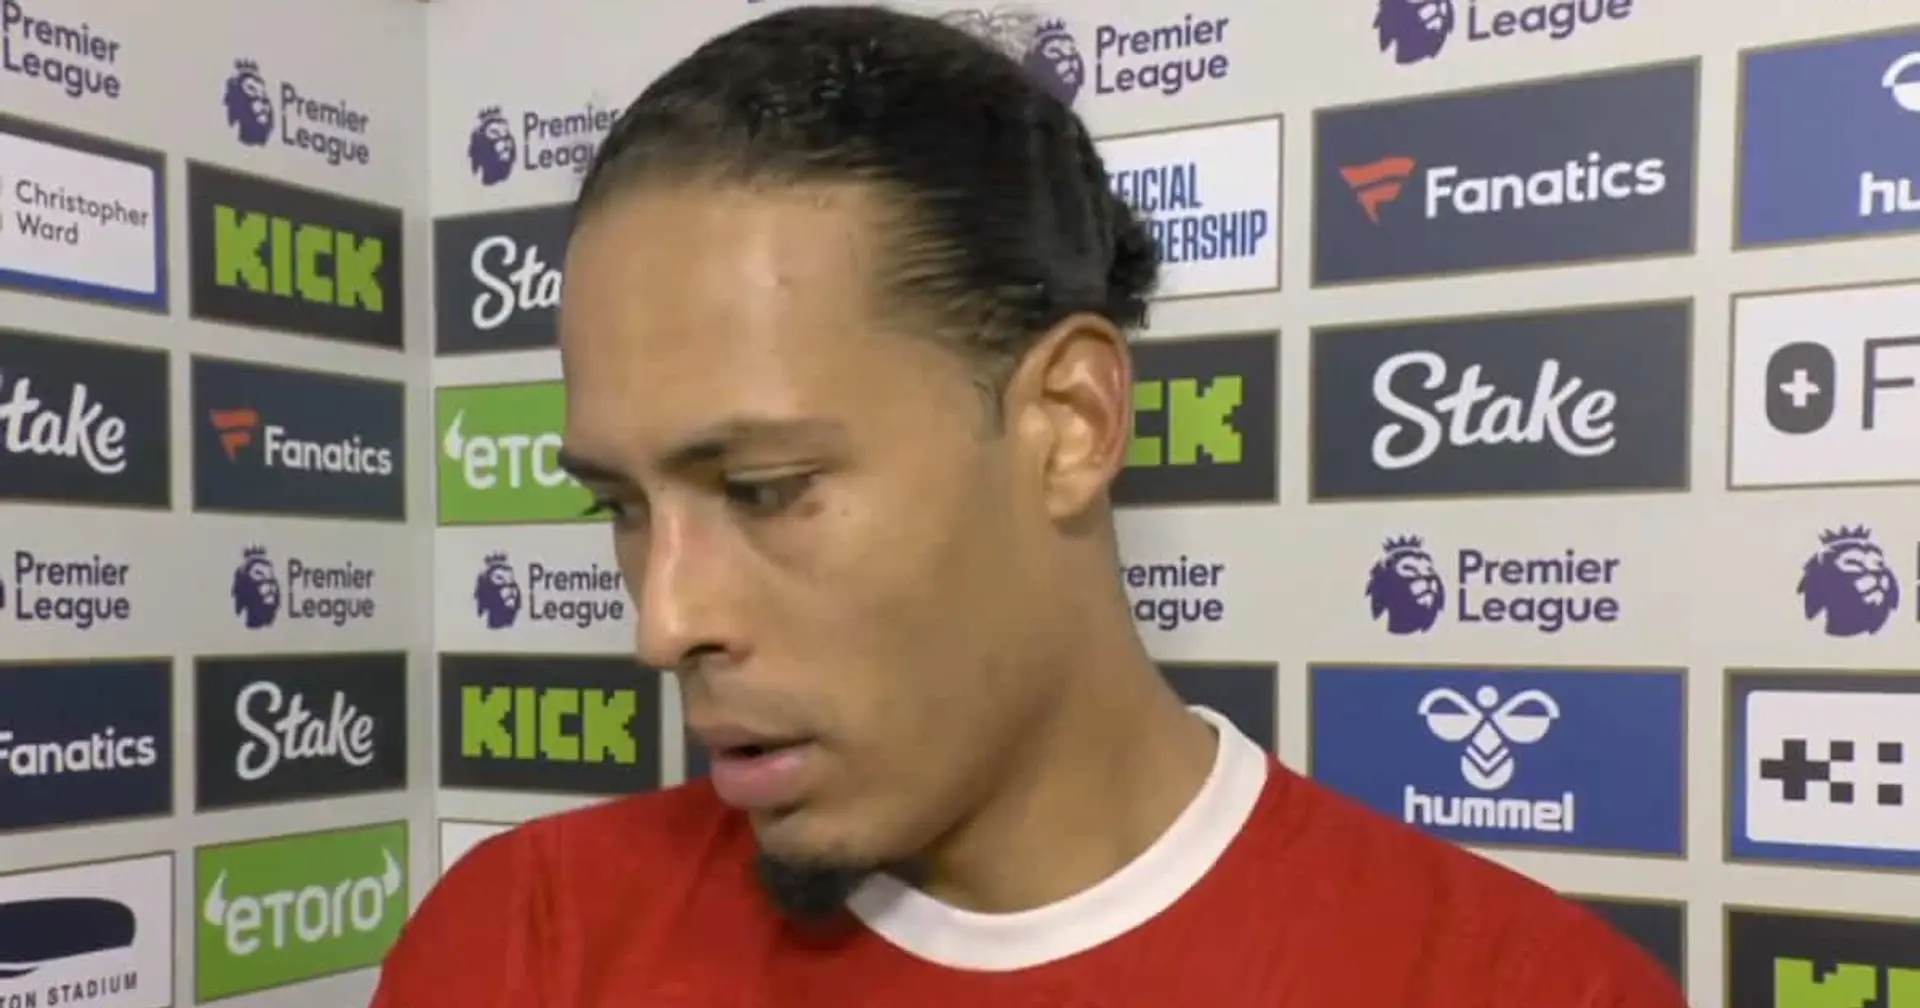 'We can’t have groups blaming each other': Virgil van Dijk on team reaction he wants to see after Everton defeat